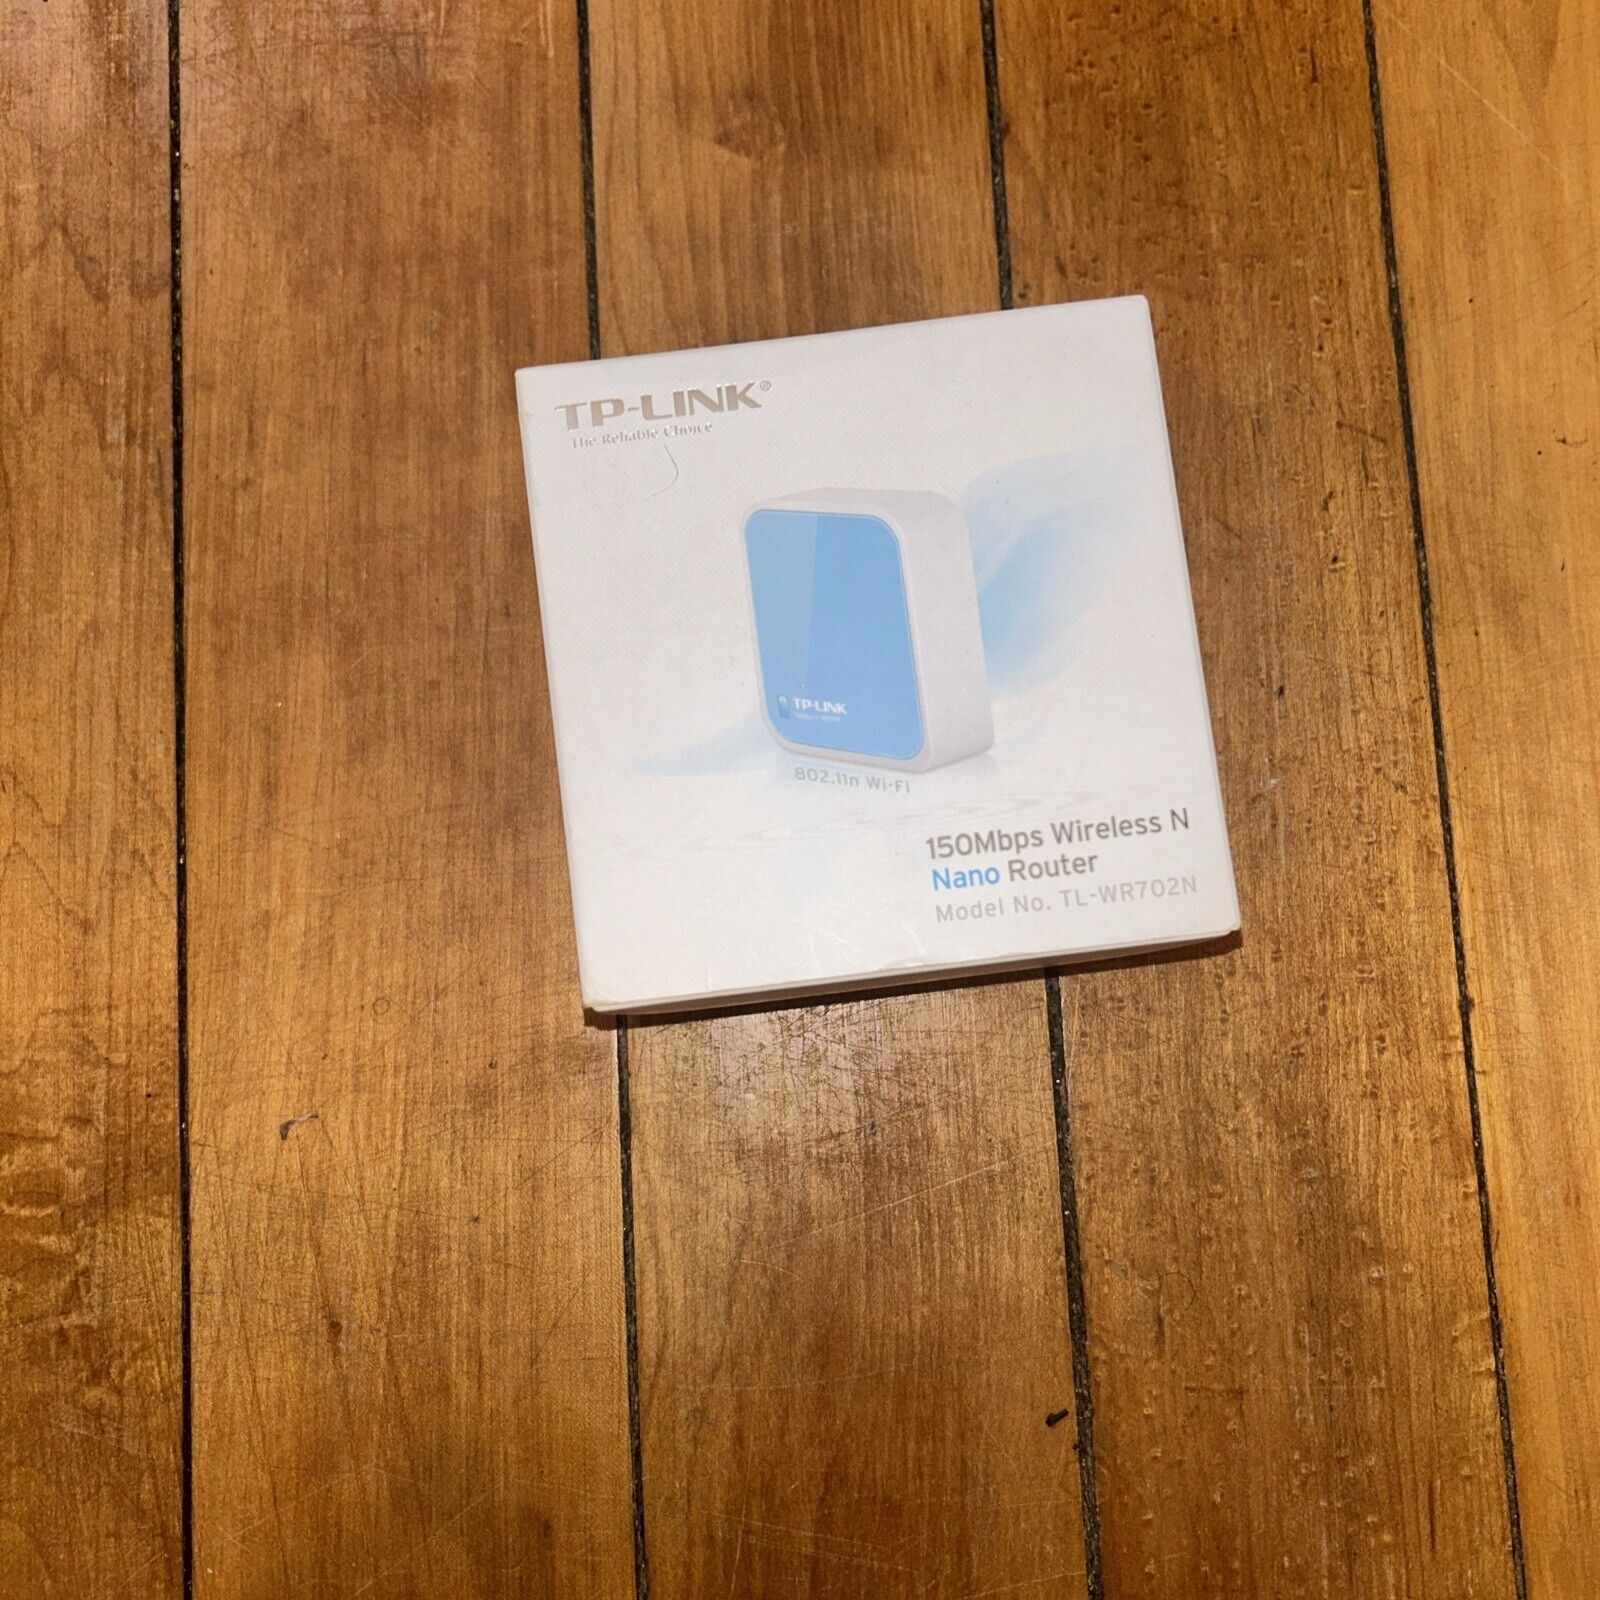 TP-Link TL-WR702N - 150Mbps Wireless N Nano Router In Box